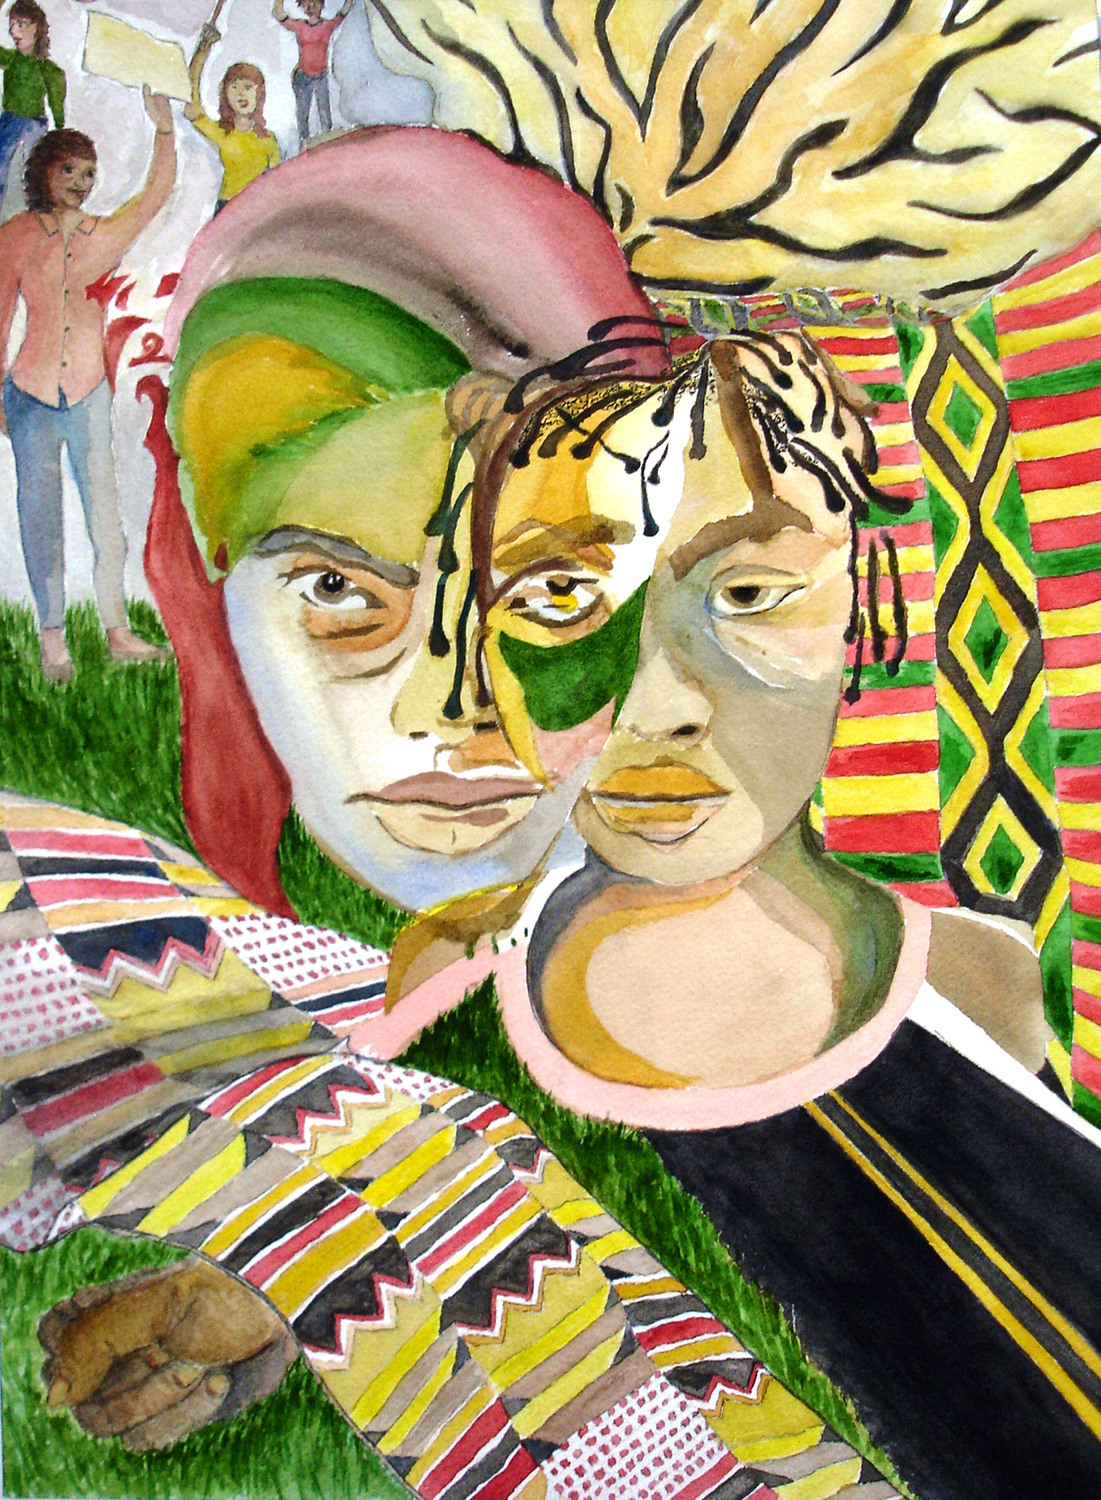 Watercolor of two women working together for change